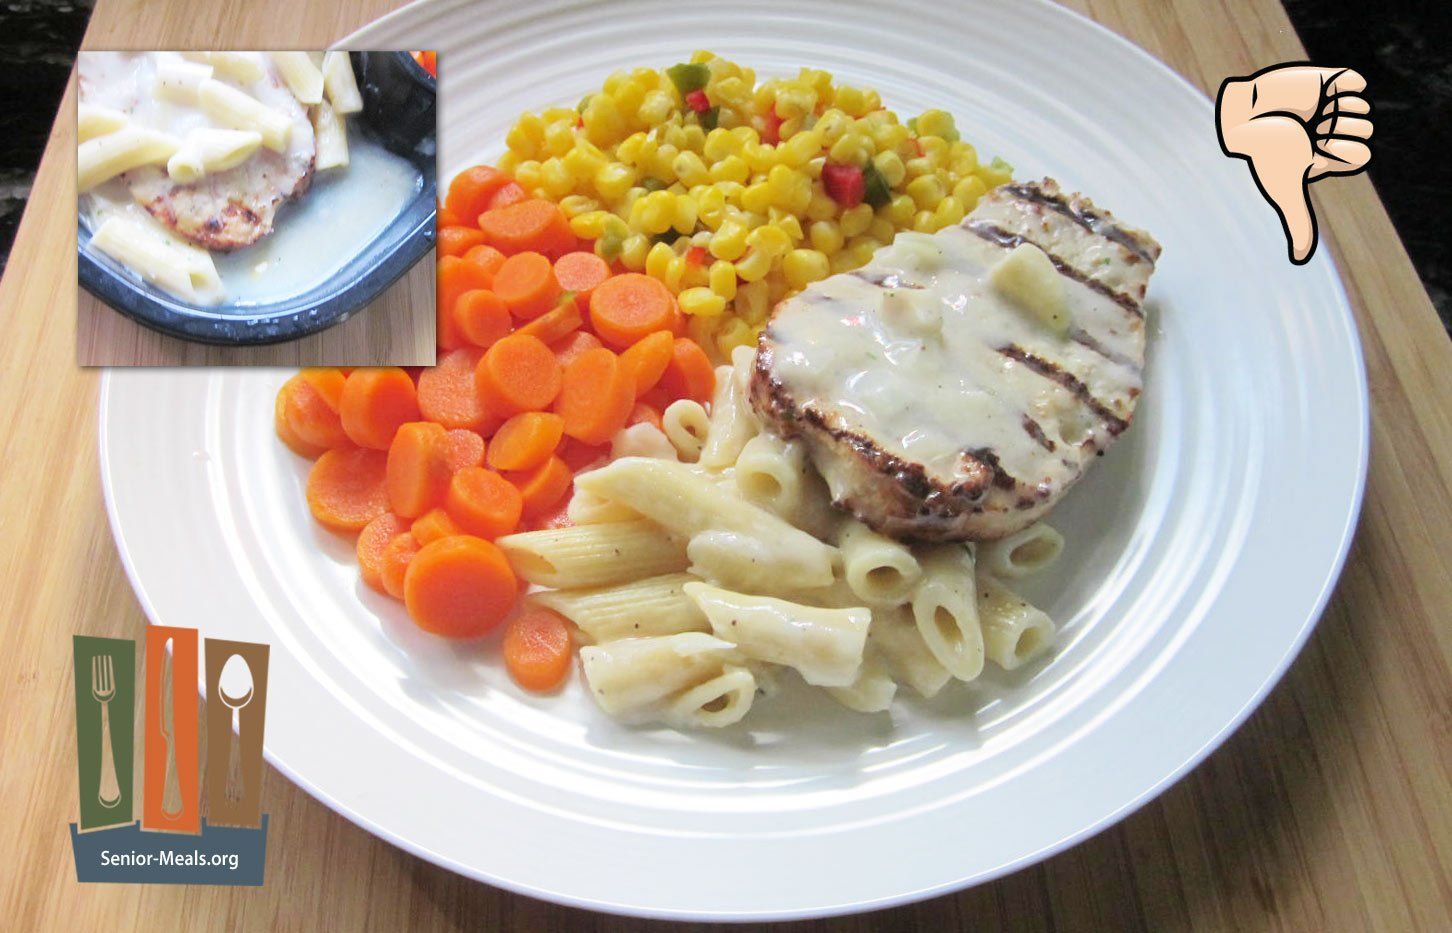 Water Damaged Chicken Patty and Penne Pasta Alfredo with Carrots and Fiesta Corn - $11.50